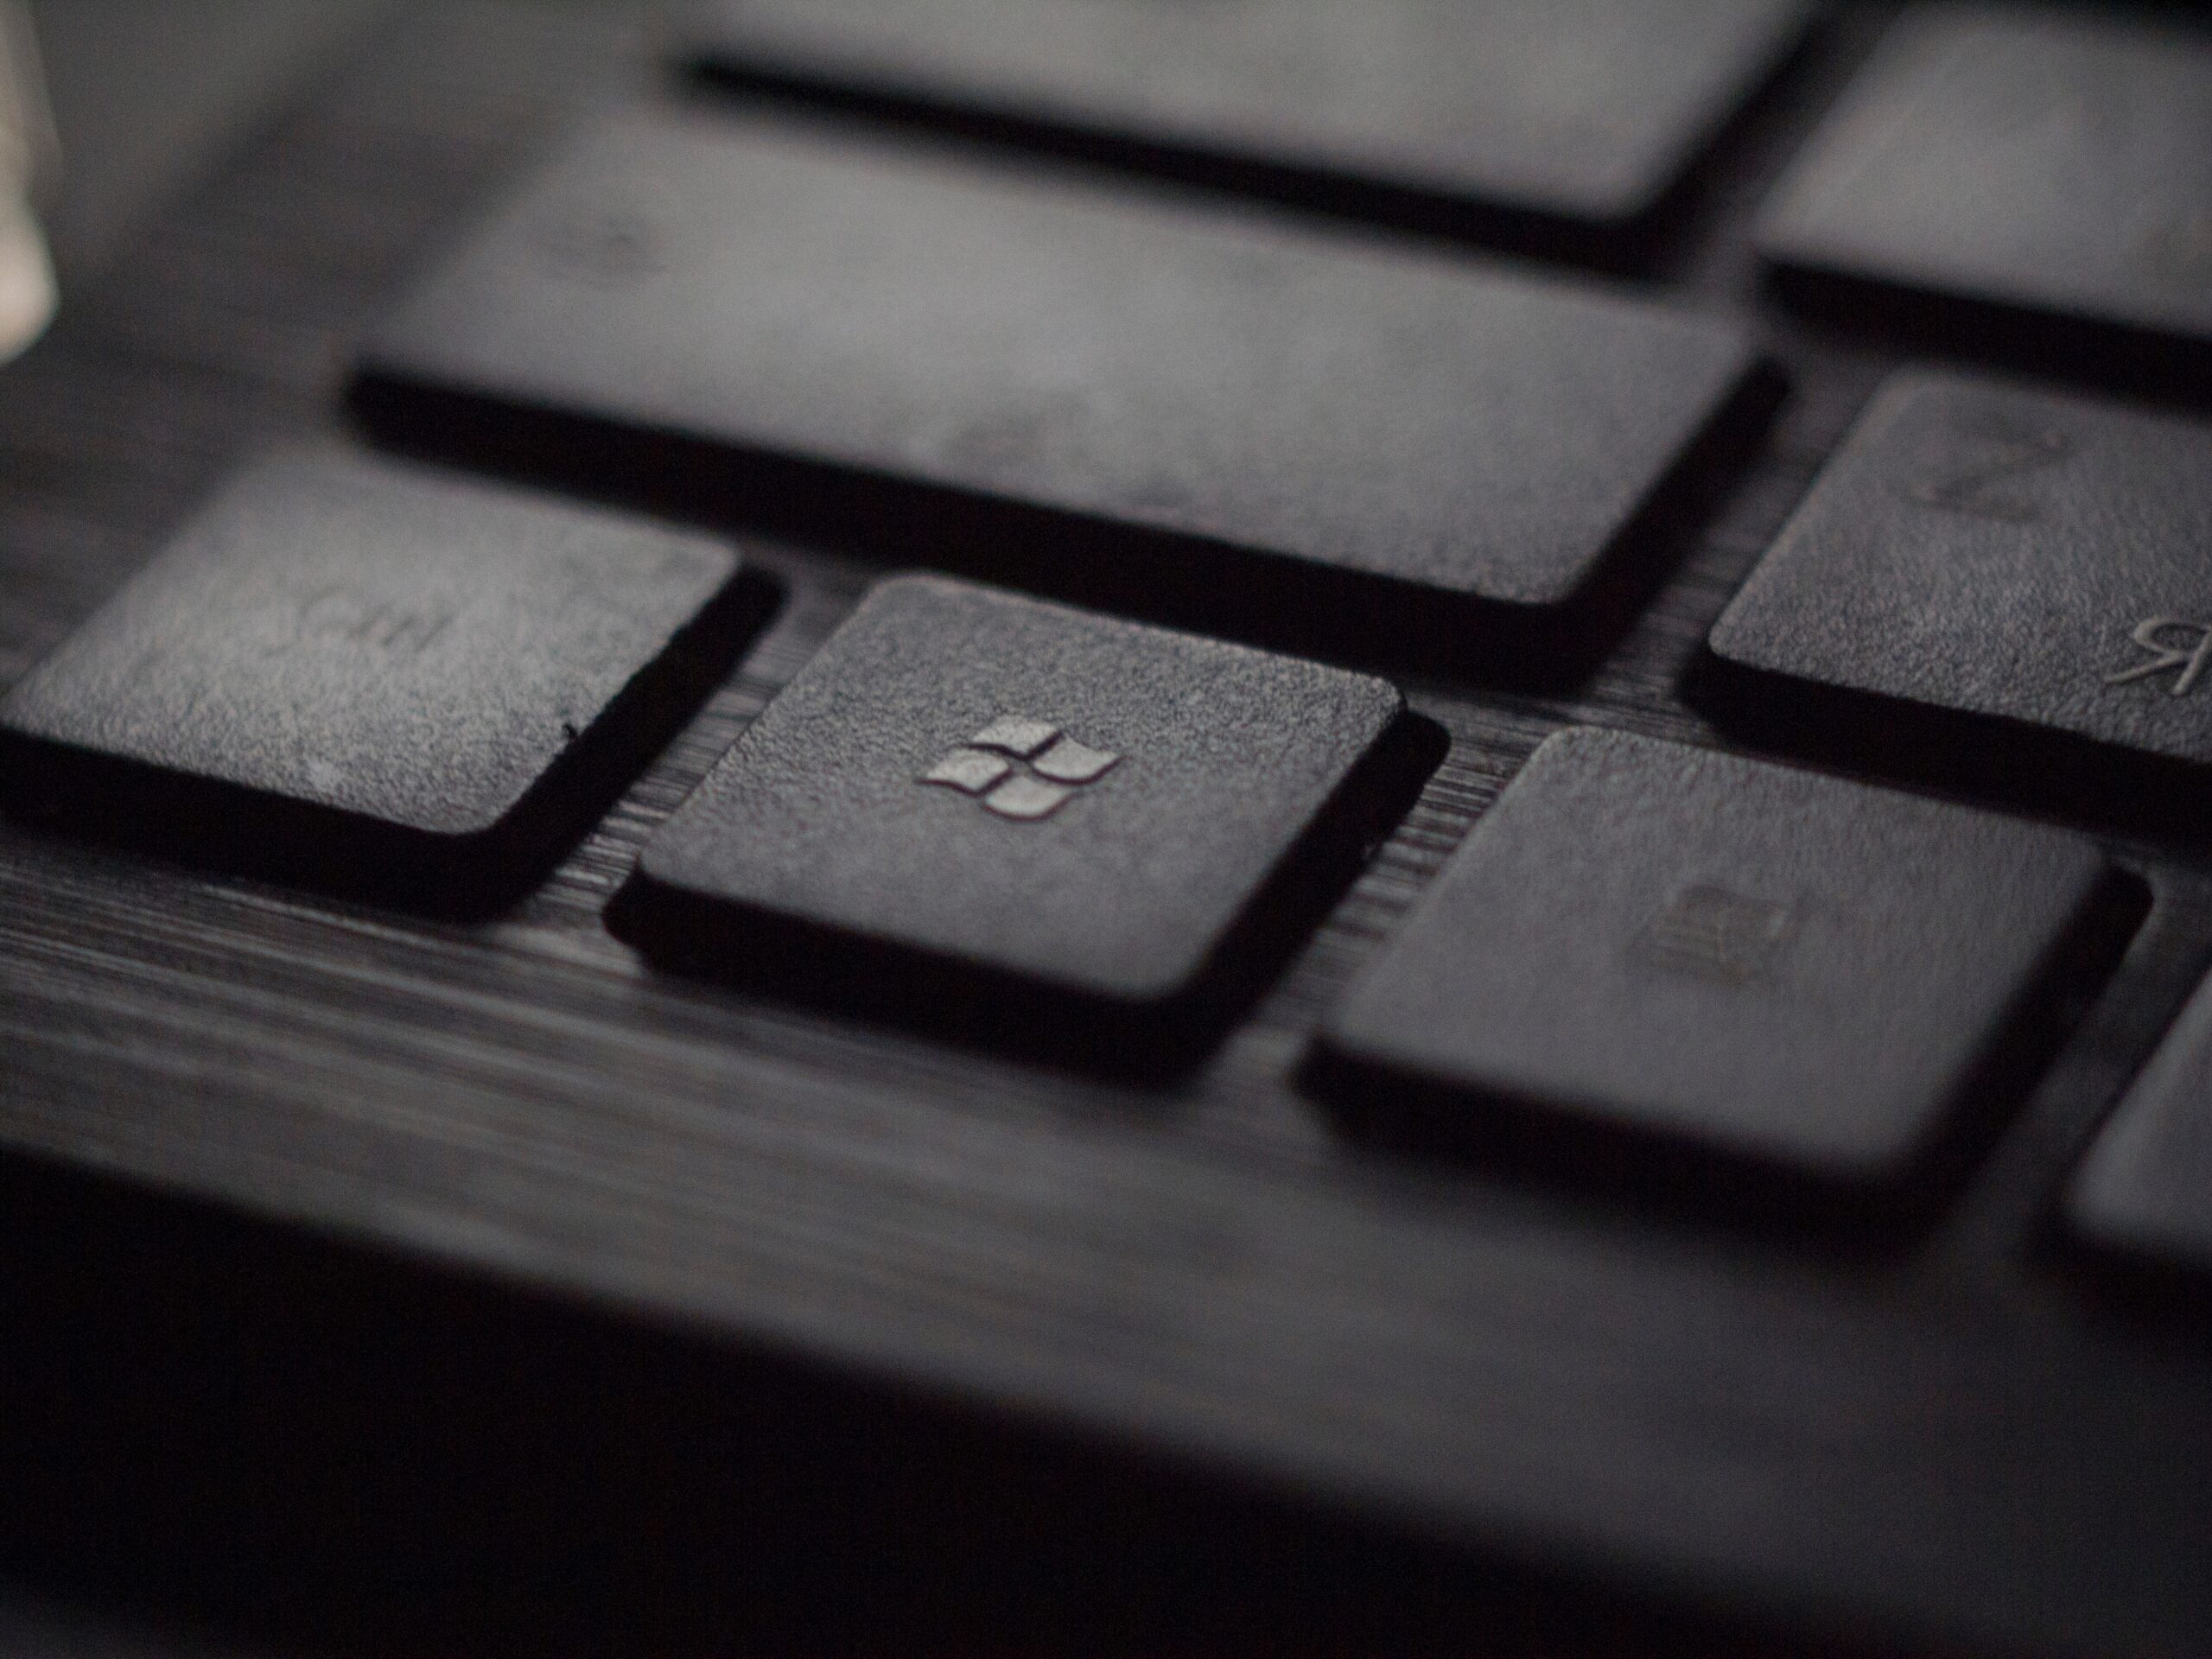 Microsoft explains how their new password monitoring system works